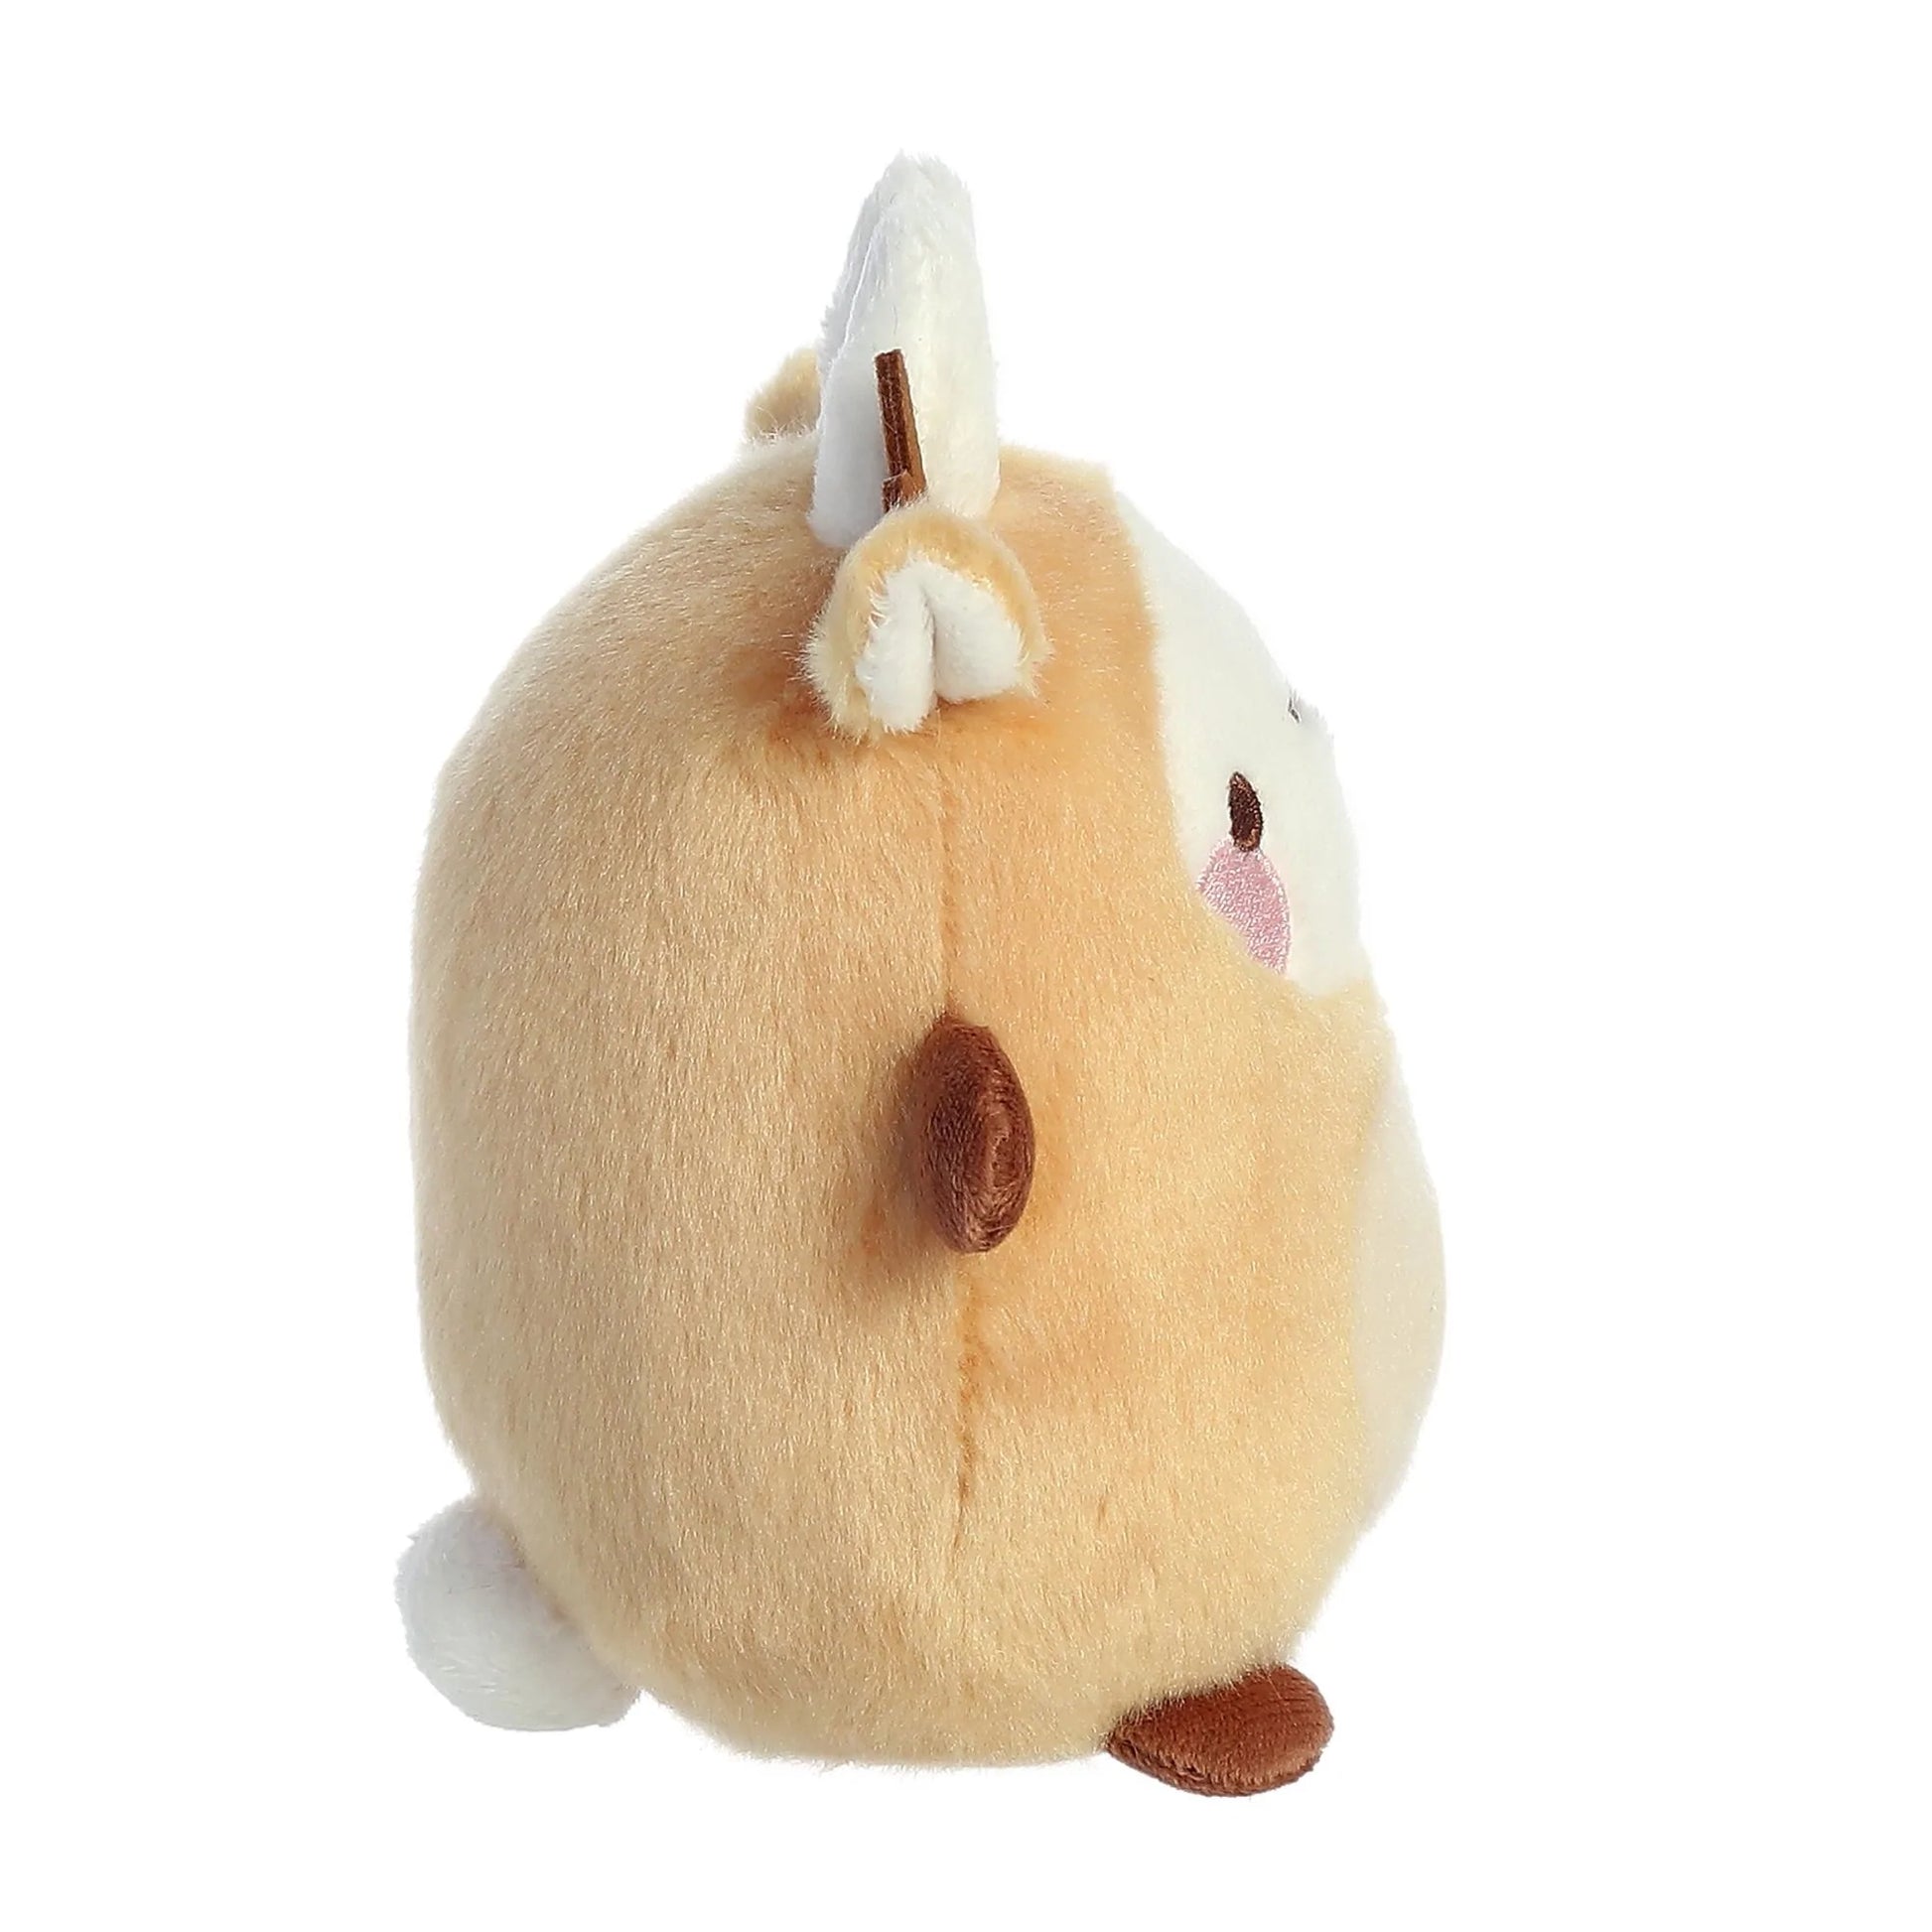 Molang is ready for some winter fun with their adorable reindeer costume! This Reindeer Molang has iconic Molang bunny in a cozy brown reindeer outfit